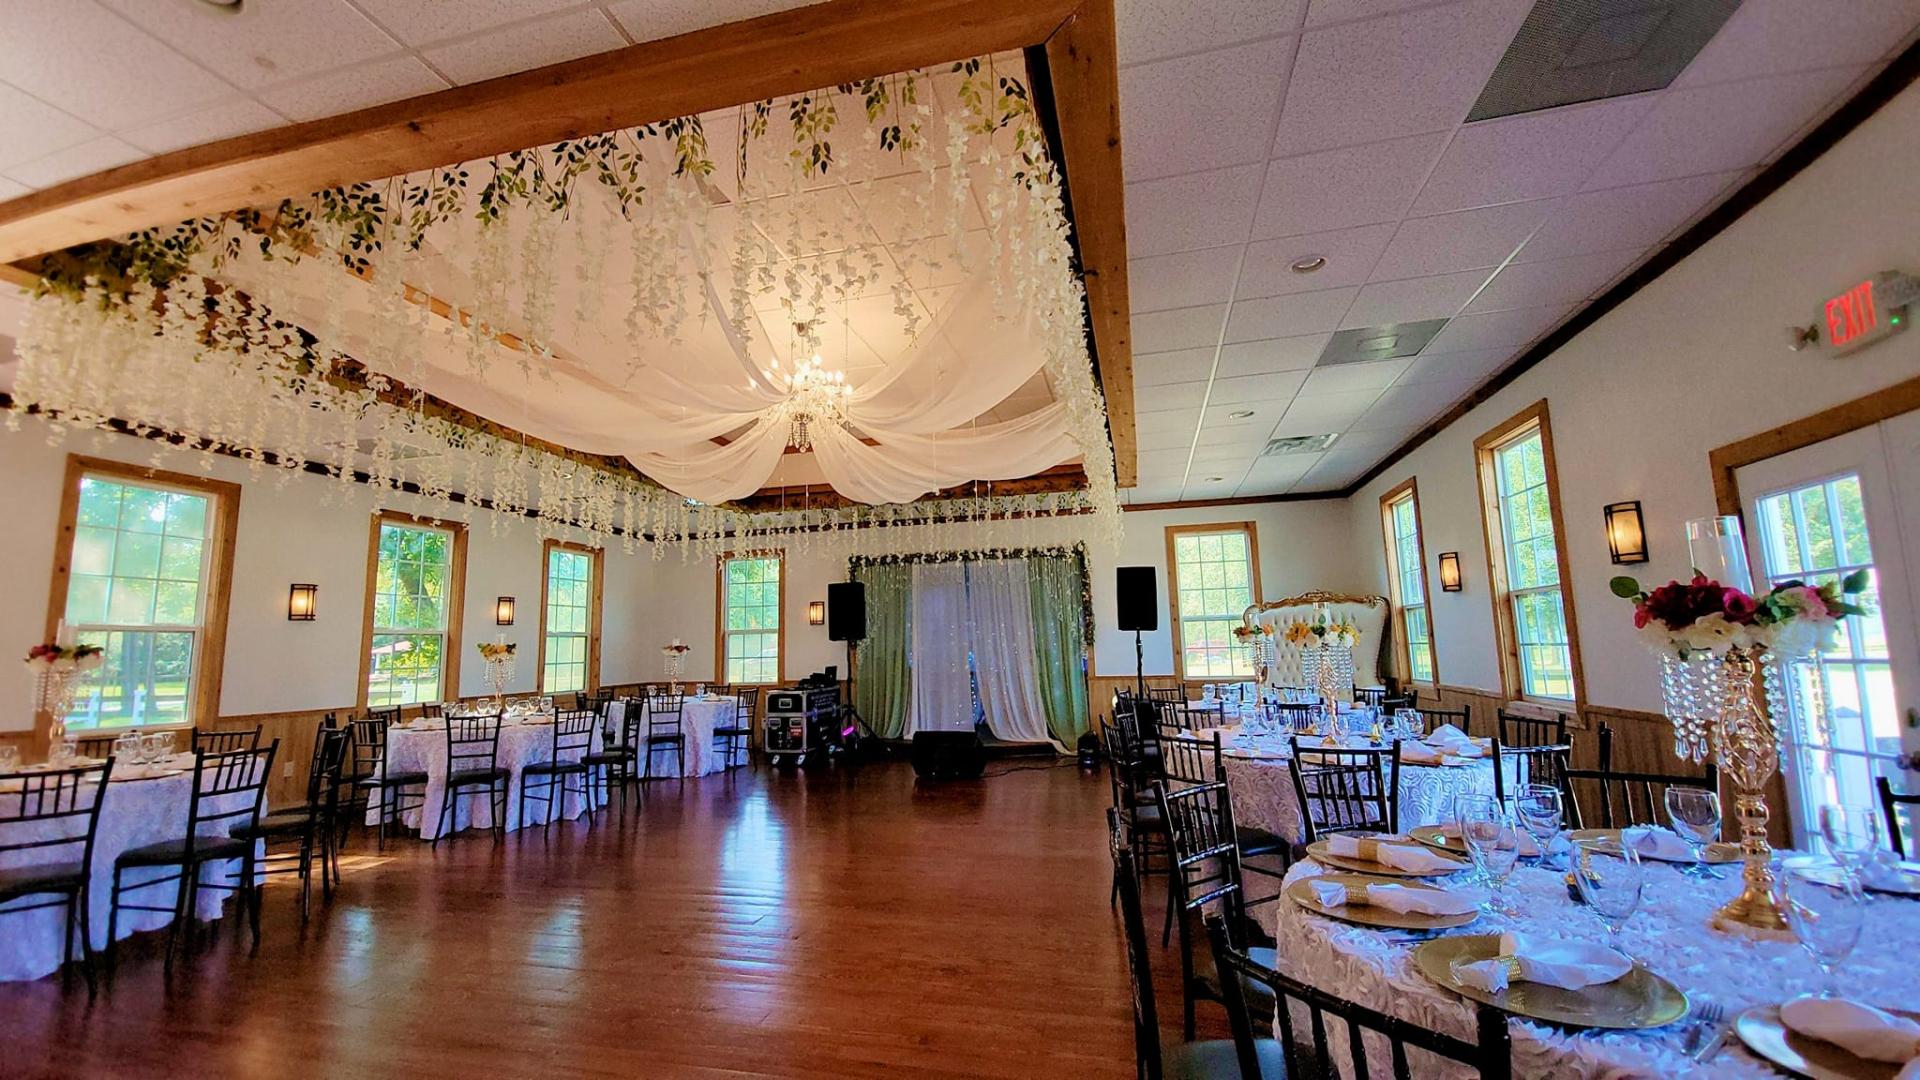 Award Ceremony Venues for Rent in Houston, TX